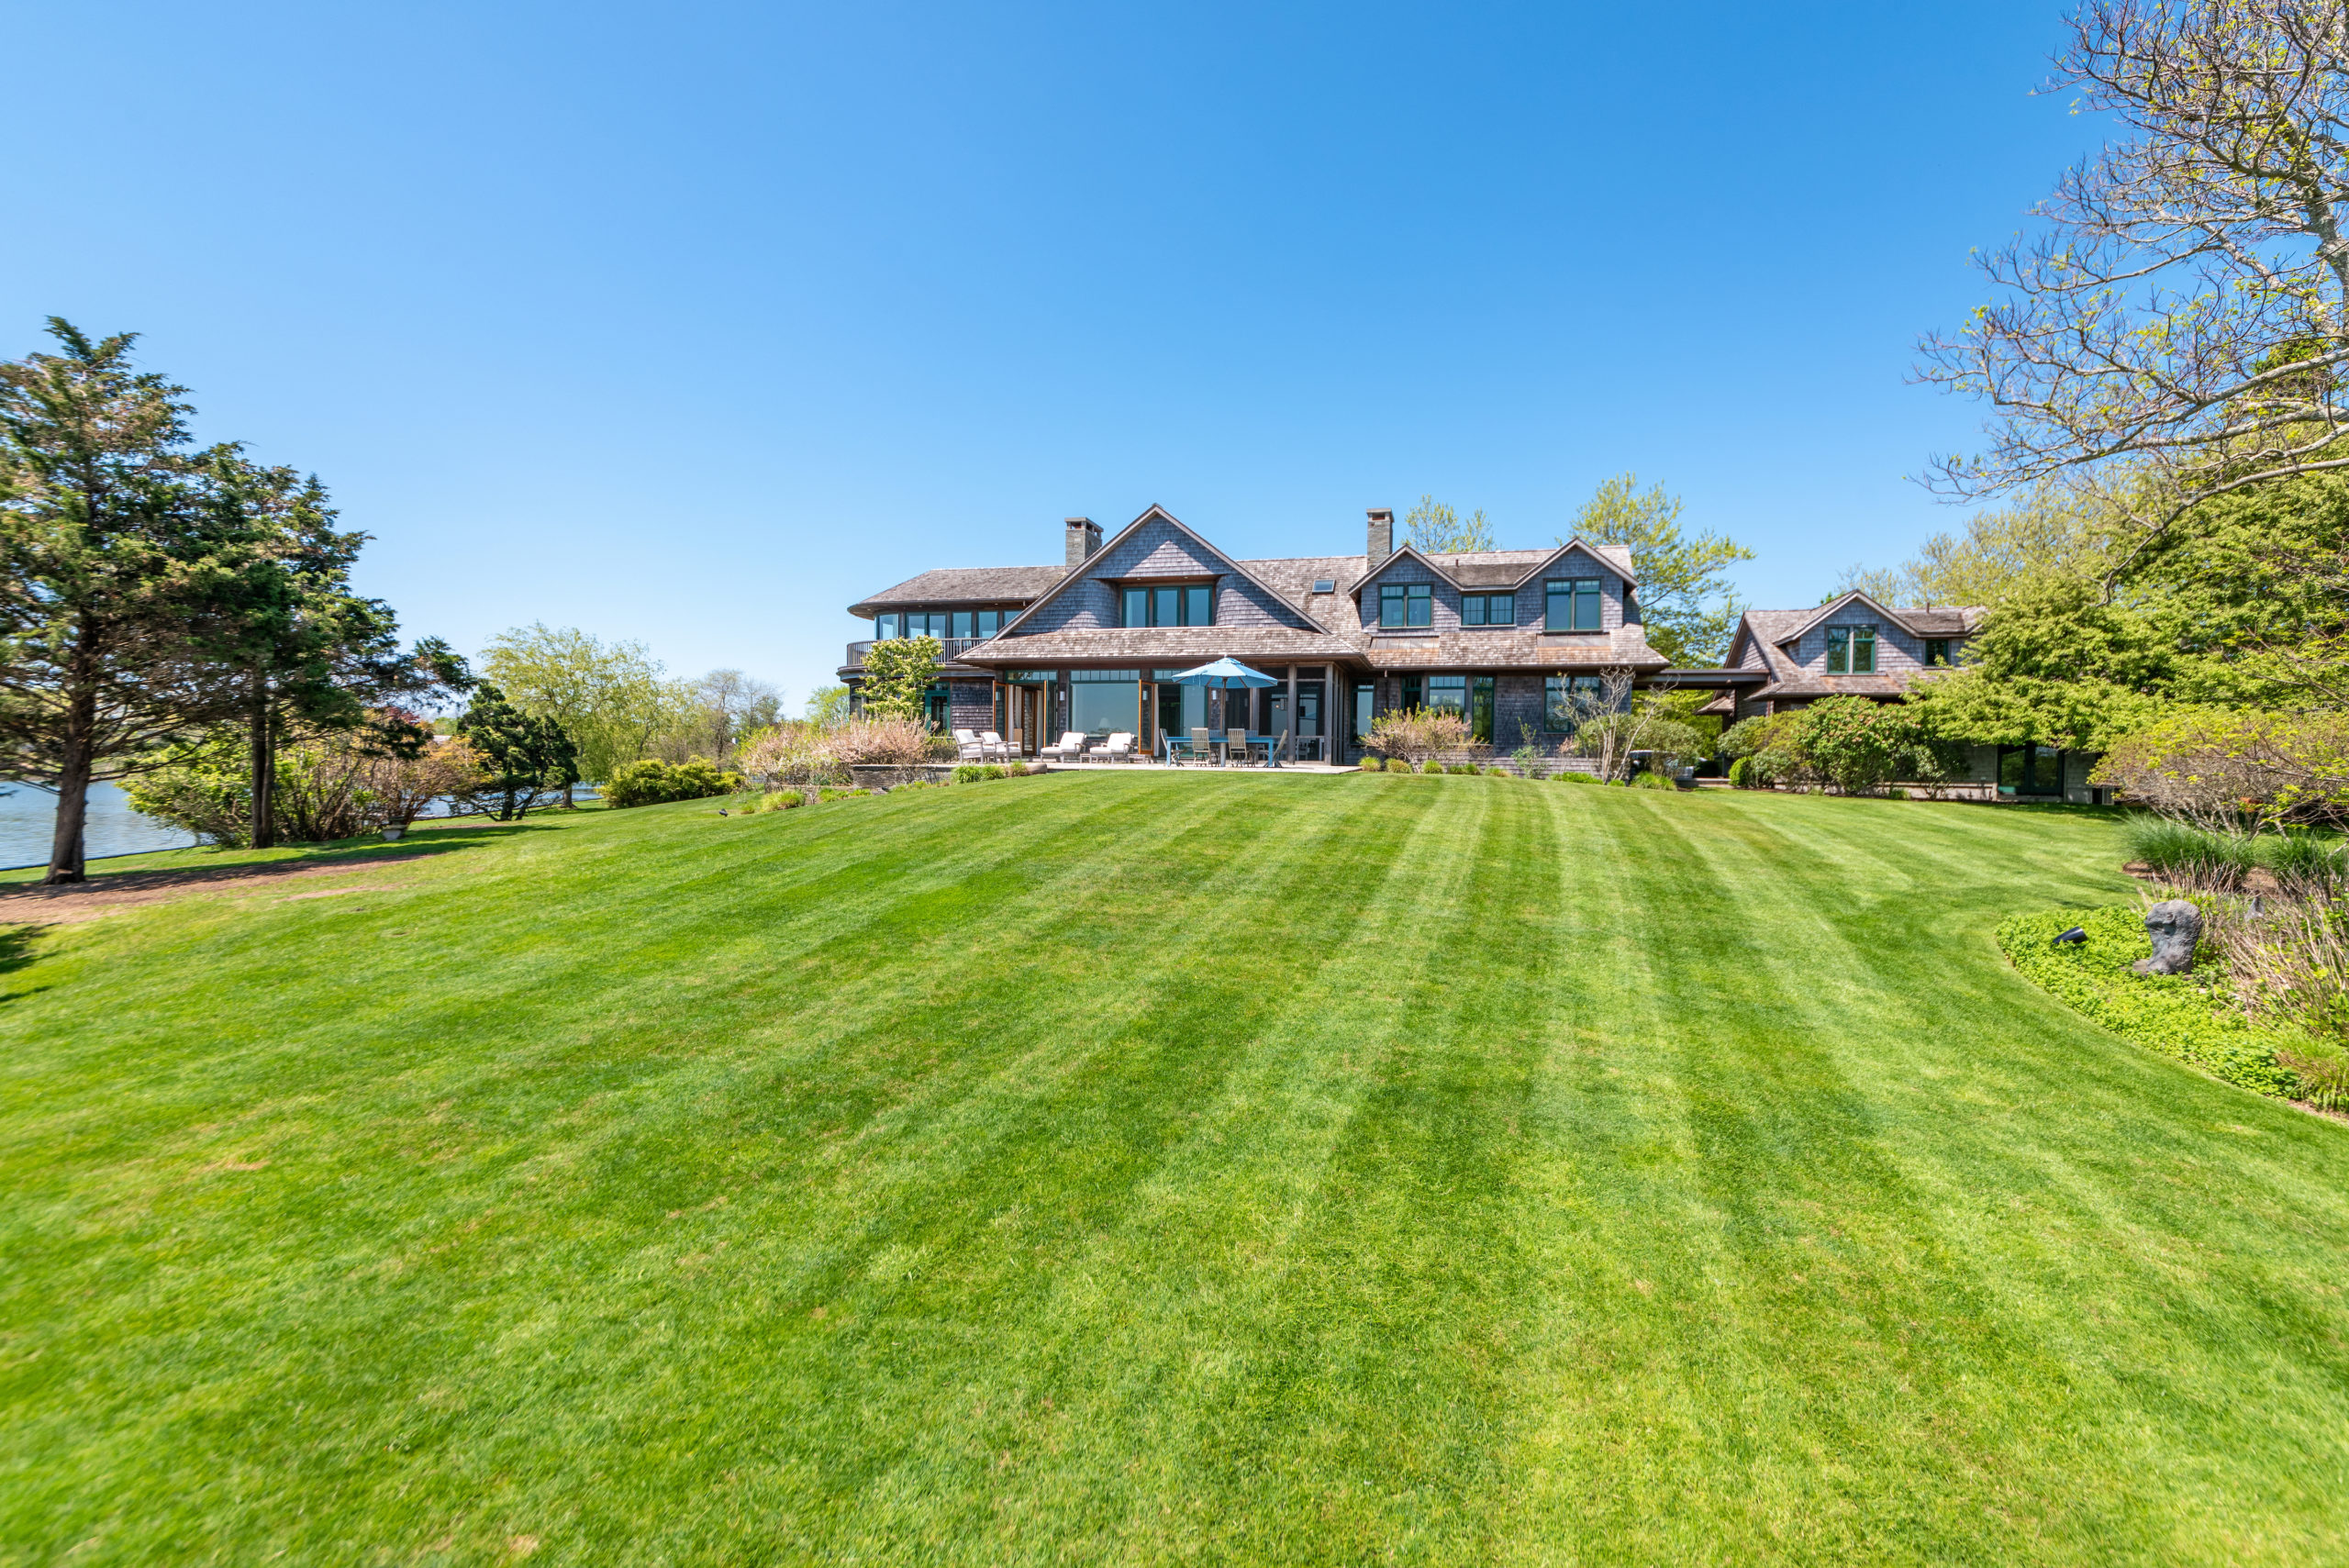 64 Holly Lane, Water Mill. COURTESY SOTHEBY'S INTERNATIONAL REALTY